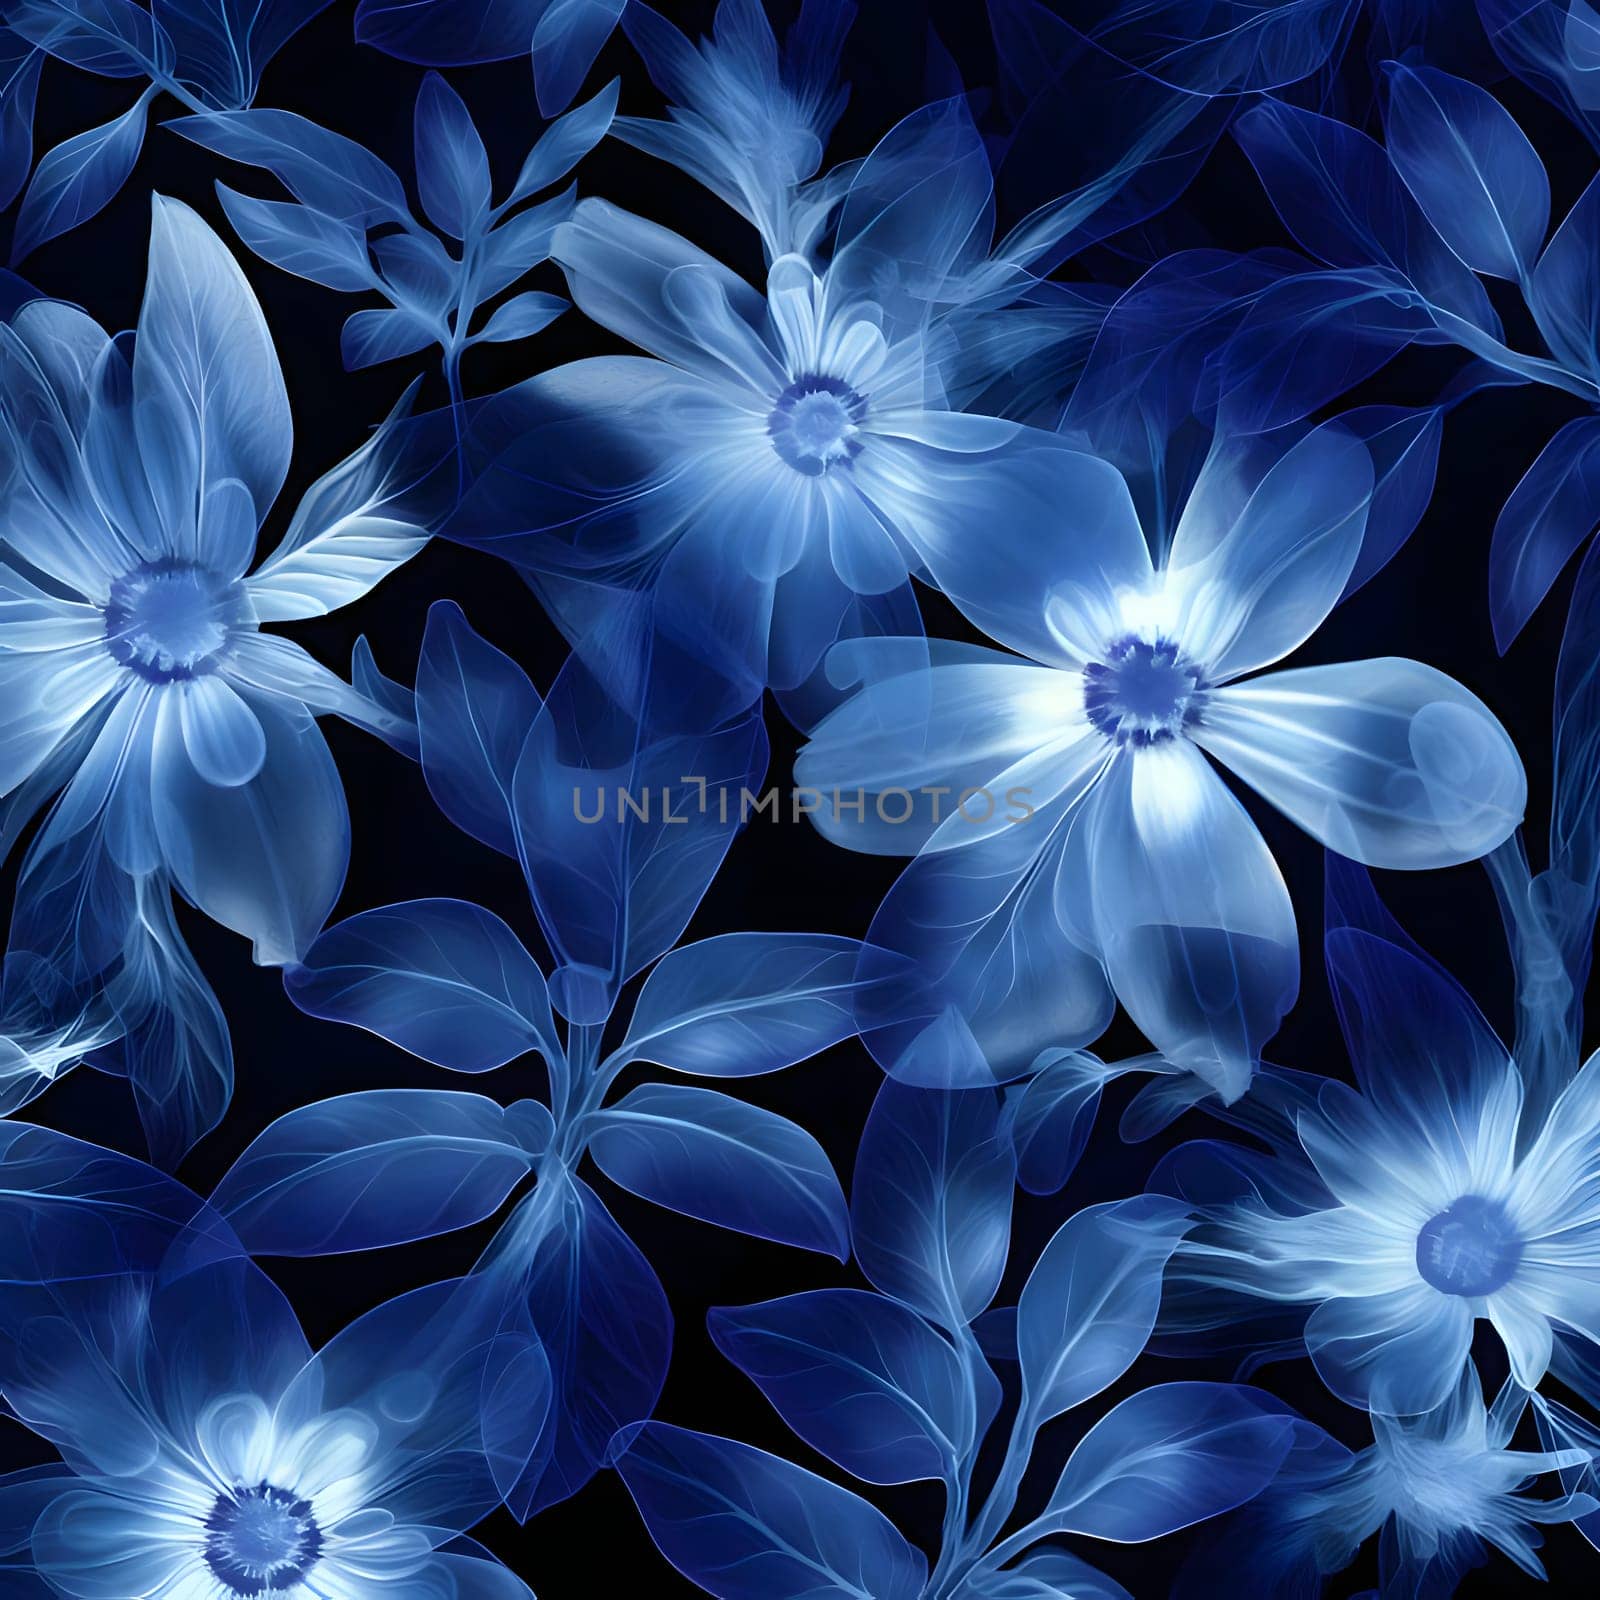 Patterns and banners backgrounds: Seamless floral pattern. Blue flowers on a black background.